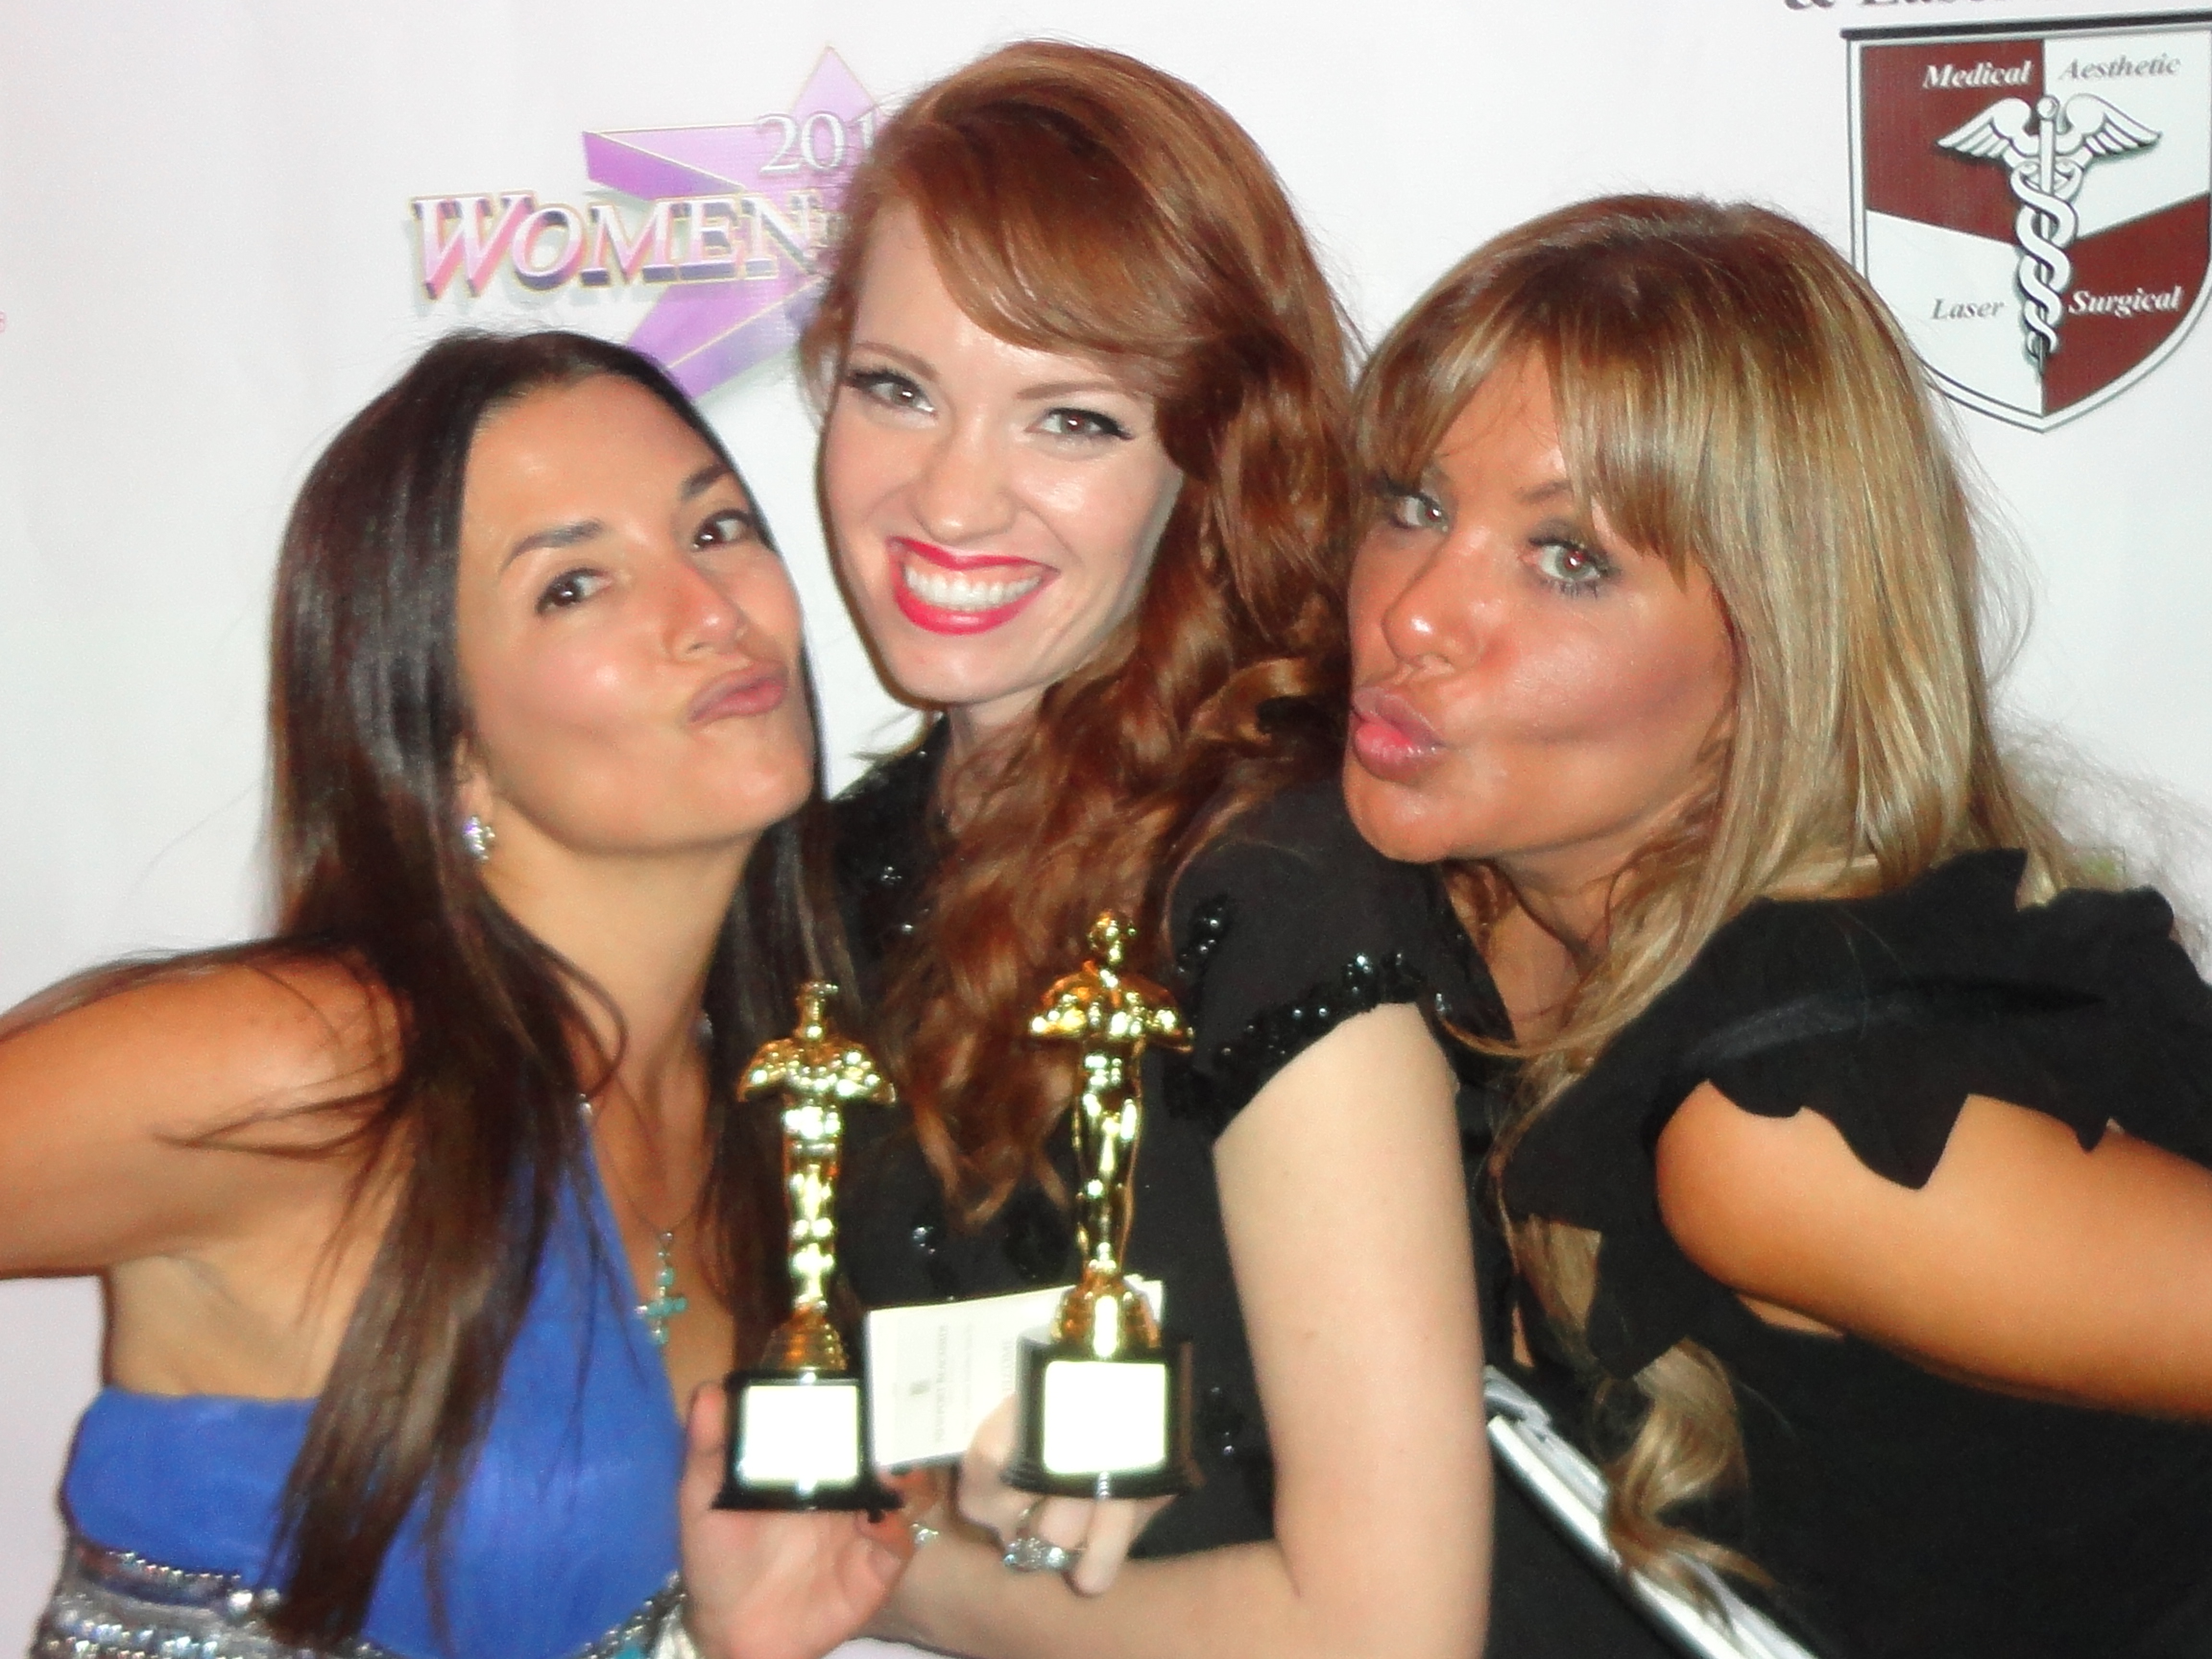 Barbie Castro, Aniela McGuinness & Diana Laura at the Woman In The Arts 2011 awards... Barbie Castro won Best Dramatic Actress